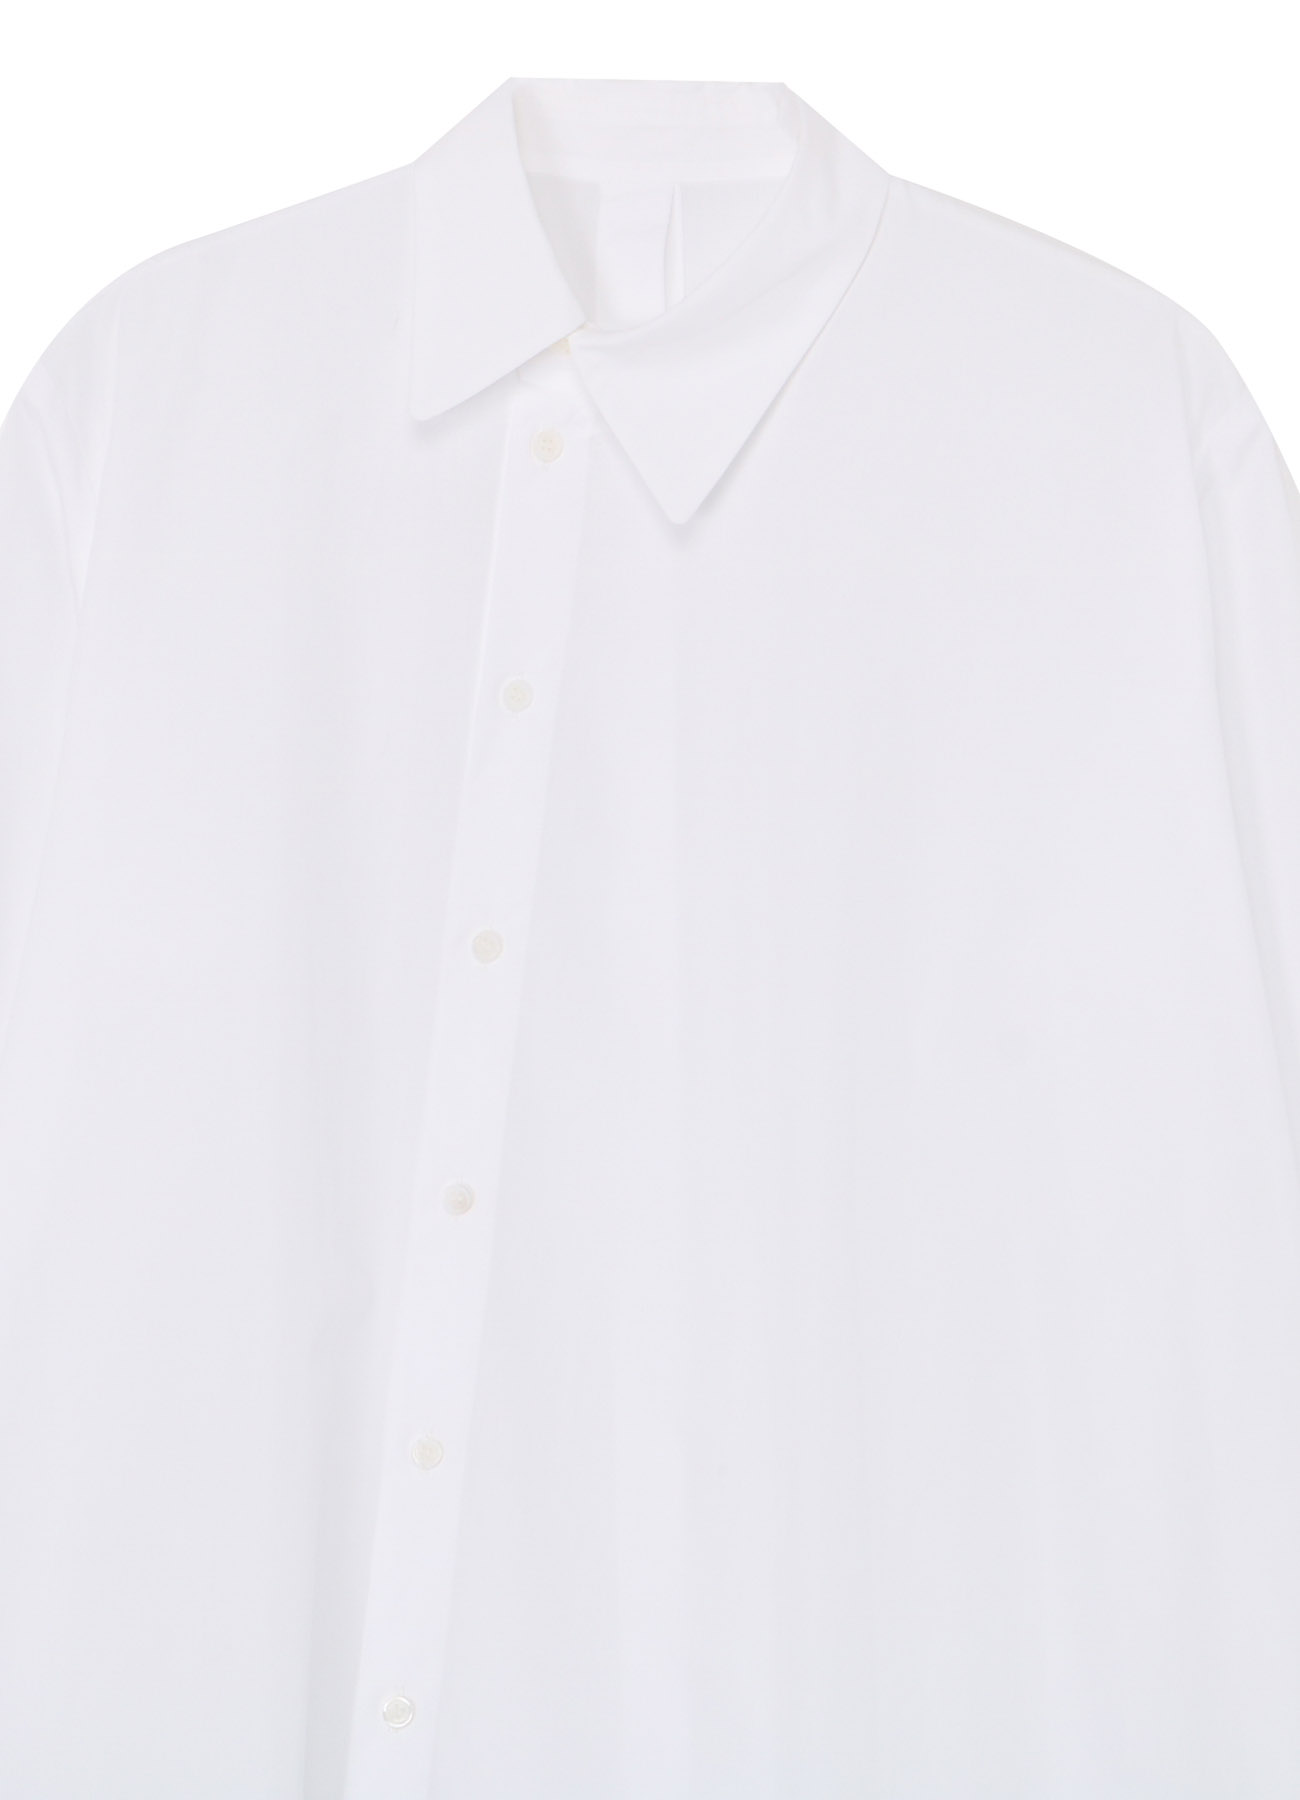 100/2 COTTON BROADCLOTH SHIRT WITH FRONT/BACK BUTTONS & UNEVEN HEMLINE